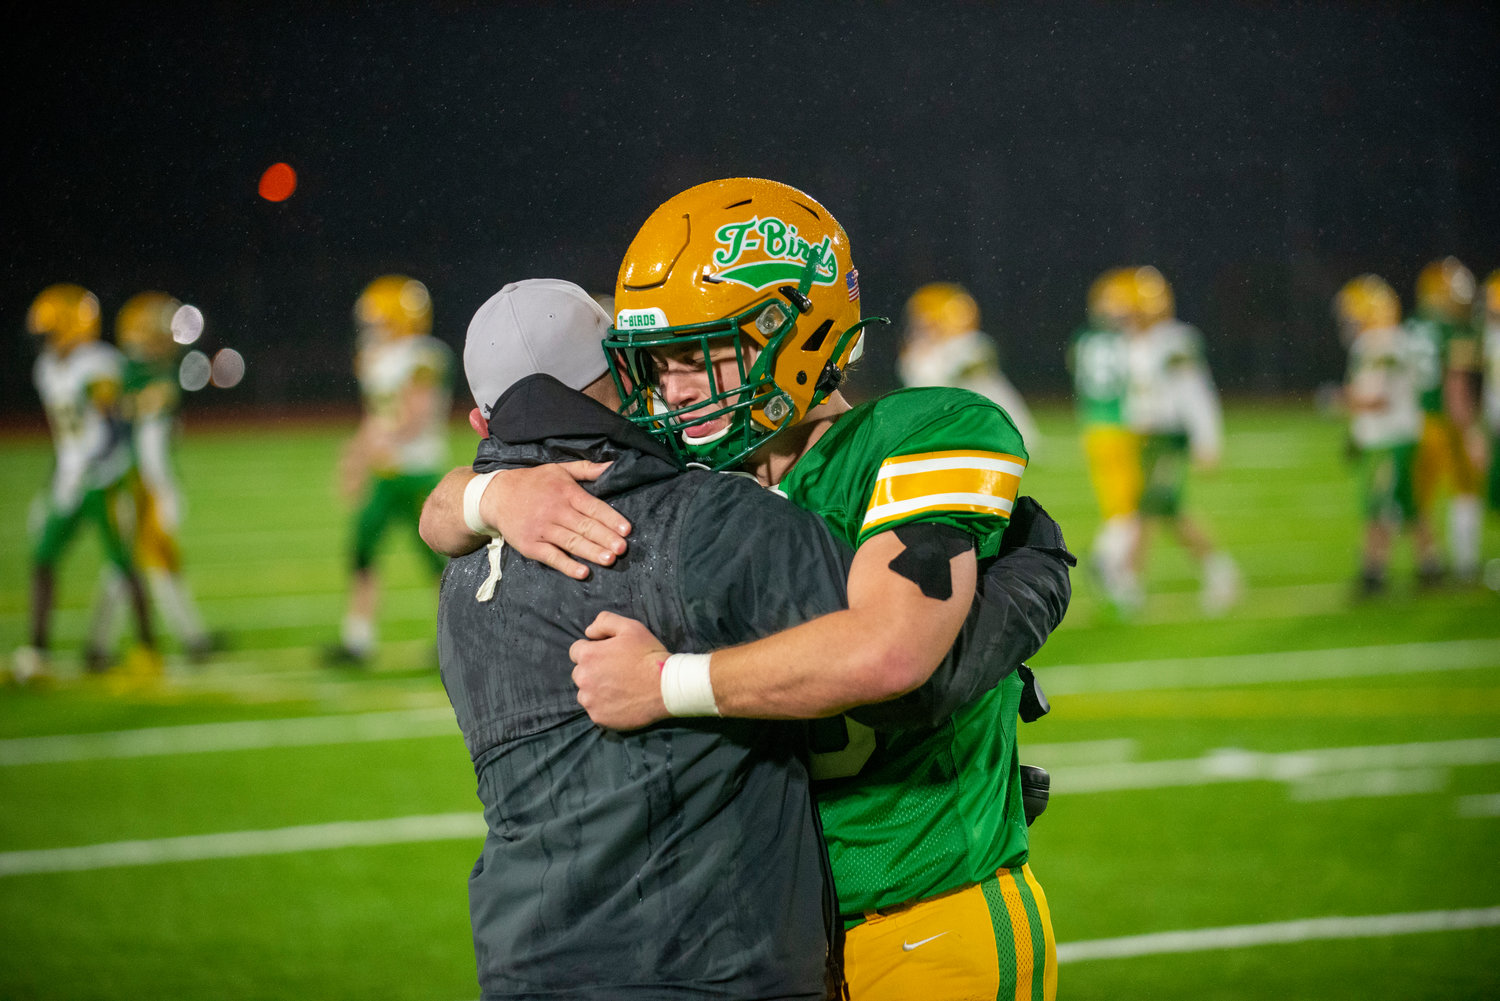 Tumwater senior Bennett Ferris hugs an assistant coach after the Thunderbirds fell 21-7 to Lynden in the 2A state football championship on Dec. 4 in Puyallup.